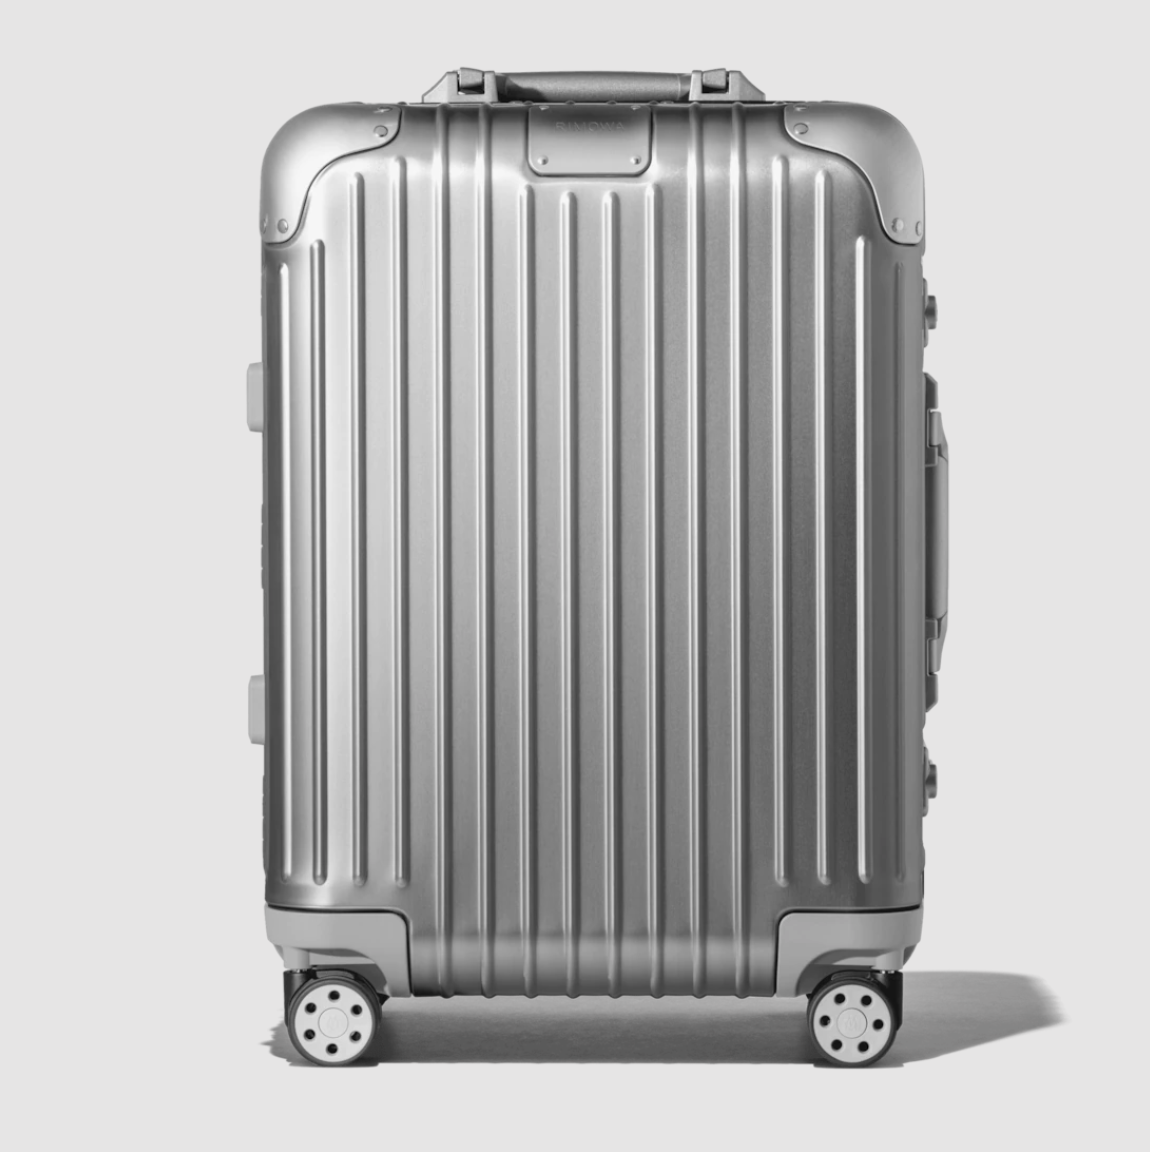 <p><strong>$1430.00</strong></p><p><a href="https://go.redirectingat.com?id=74968X1553576&url=https%3A%2F%2Fwww.rimowa.com%2Fus%2Fen%2Fluggage%2Fcolour%2Fsilver%2Fcabin%2F92553004.html&sref=https%3A%2F%2Fwww.townandcountrymag.com%2Fstyle%2Fmens-fashion%2Fg45575330%2Fbest-mens-travel-bags%2F">Shop Now</a></p><p>If you're an avid <em>T&C</em> reader, you'll know <a href="https://www.townandcountrymag.com/style/fashion-trends/a43977546/how-to-pack-carryon-suitcase/">we're team carry-on</a>, and team carry-on only. The Cadillac of luggage, this aluminum TSA-approved option is not only durable and lightweight, but it's also supremely spacious and can hold a week's worth of clothes (perhaps even more if you own compression bags).</p><p><strong>One reviewer writes</strong>: "Luxurious, sturdy, beautiful. My favorite luggage. We travel everywhere together and it has never let me down. "</p><p><strong>Material: </strong>Aluminum</p><p><strong>Dimensions:</strong> 21.7 x 15.8 x 9.1 inch</p><p><strong>More:</strong> <a href="https://www.townandcountrymag.com/style/fashion-trends/g44448971/best-carry-on-luggage/">The Very Best Carry-On Luggage to Take With You on Your Next Trip</a></p>